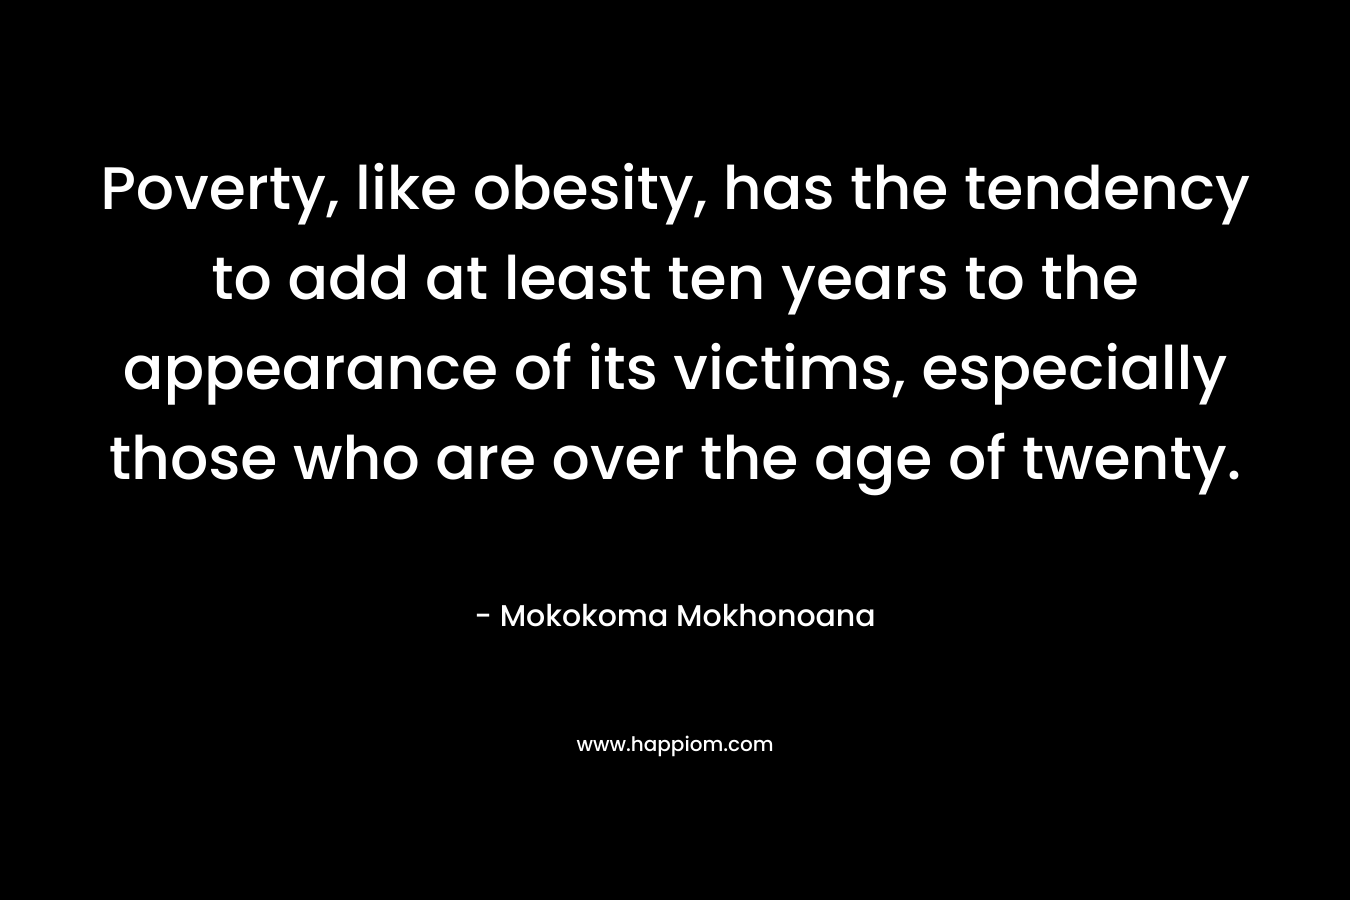 Poverty, like obesity, has the tendency to add at least ten years to the appearance of its victims, especially those who are over the age of twenty.